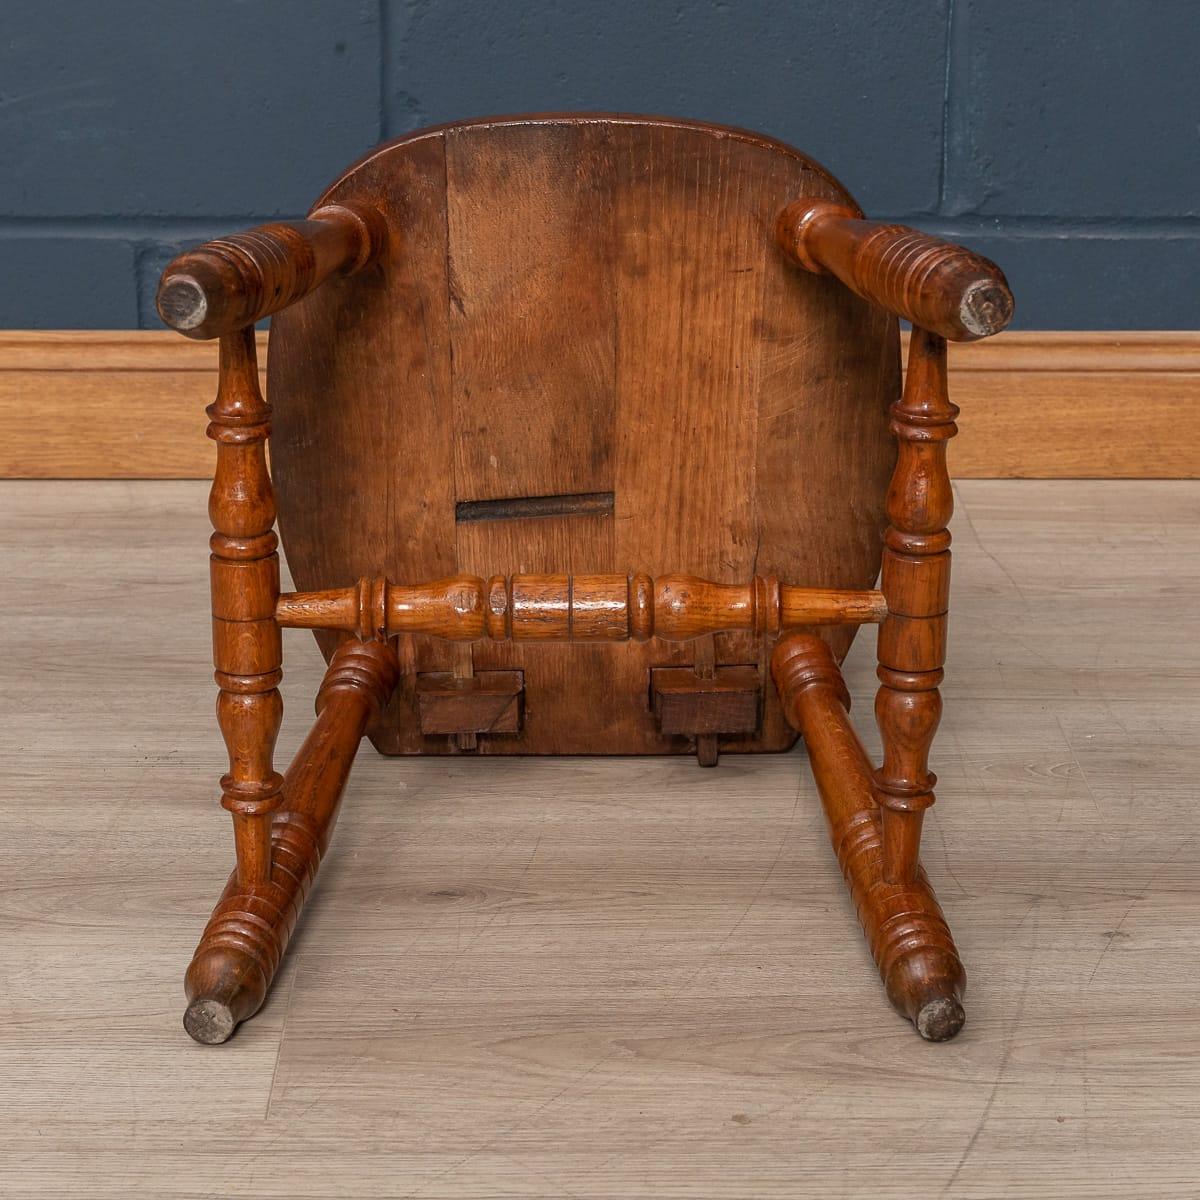 19th Century Hall Oak Chair From The Foudroyant, Lord Nelson’s Flagship 1